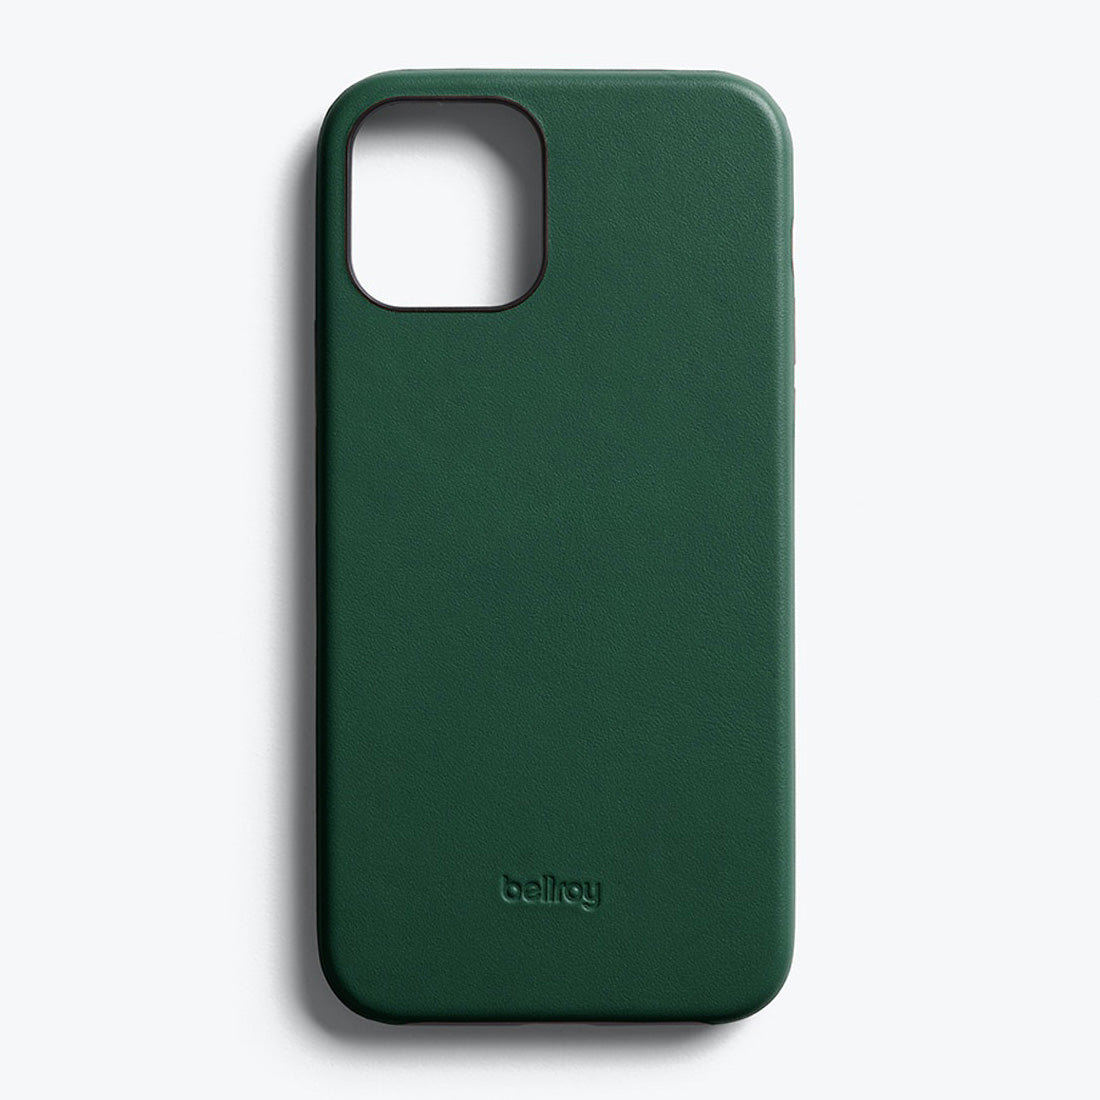 Bellroy Slim Genuine Leather Case For iPhone iPhone 12 Pro Max - RACING GREEN - Mac Addict